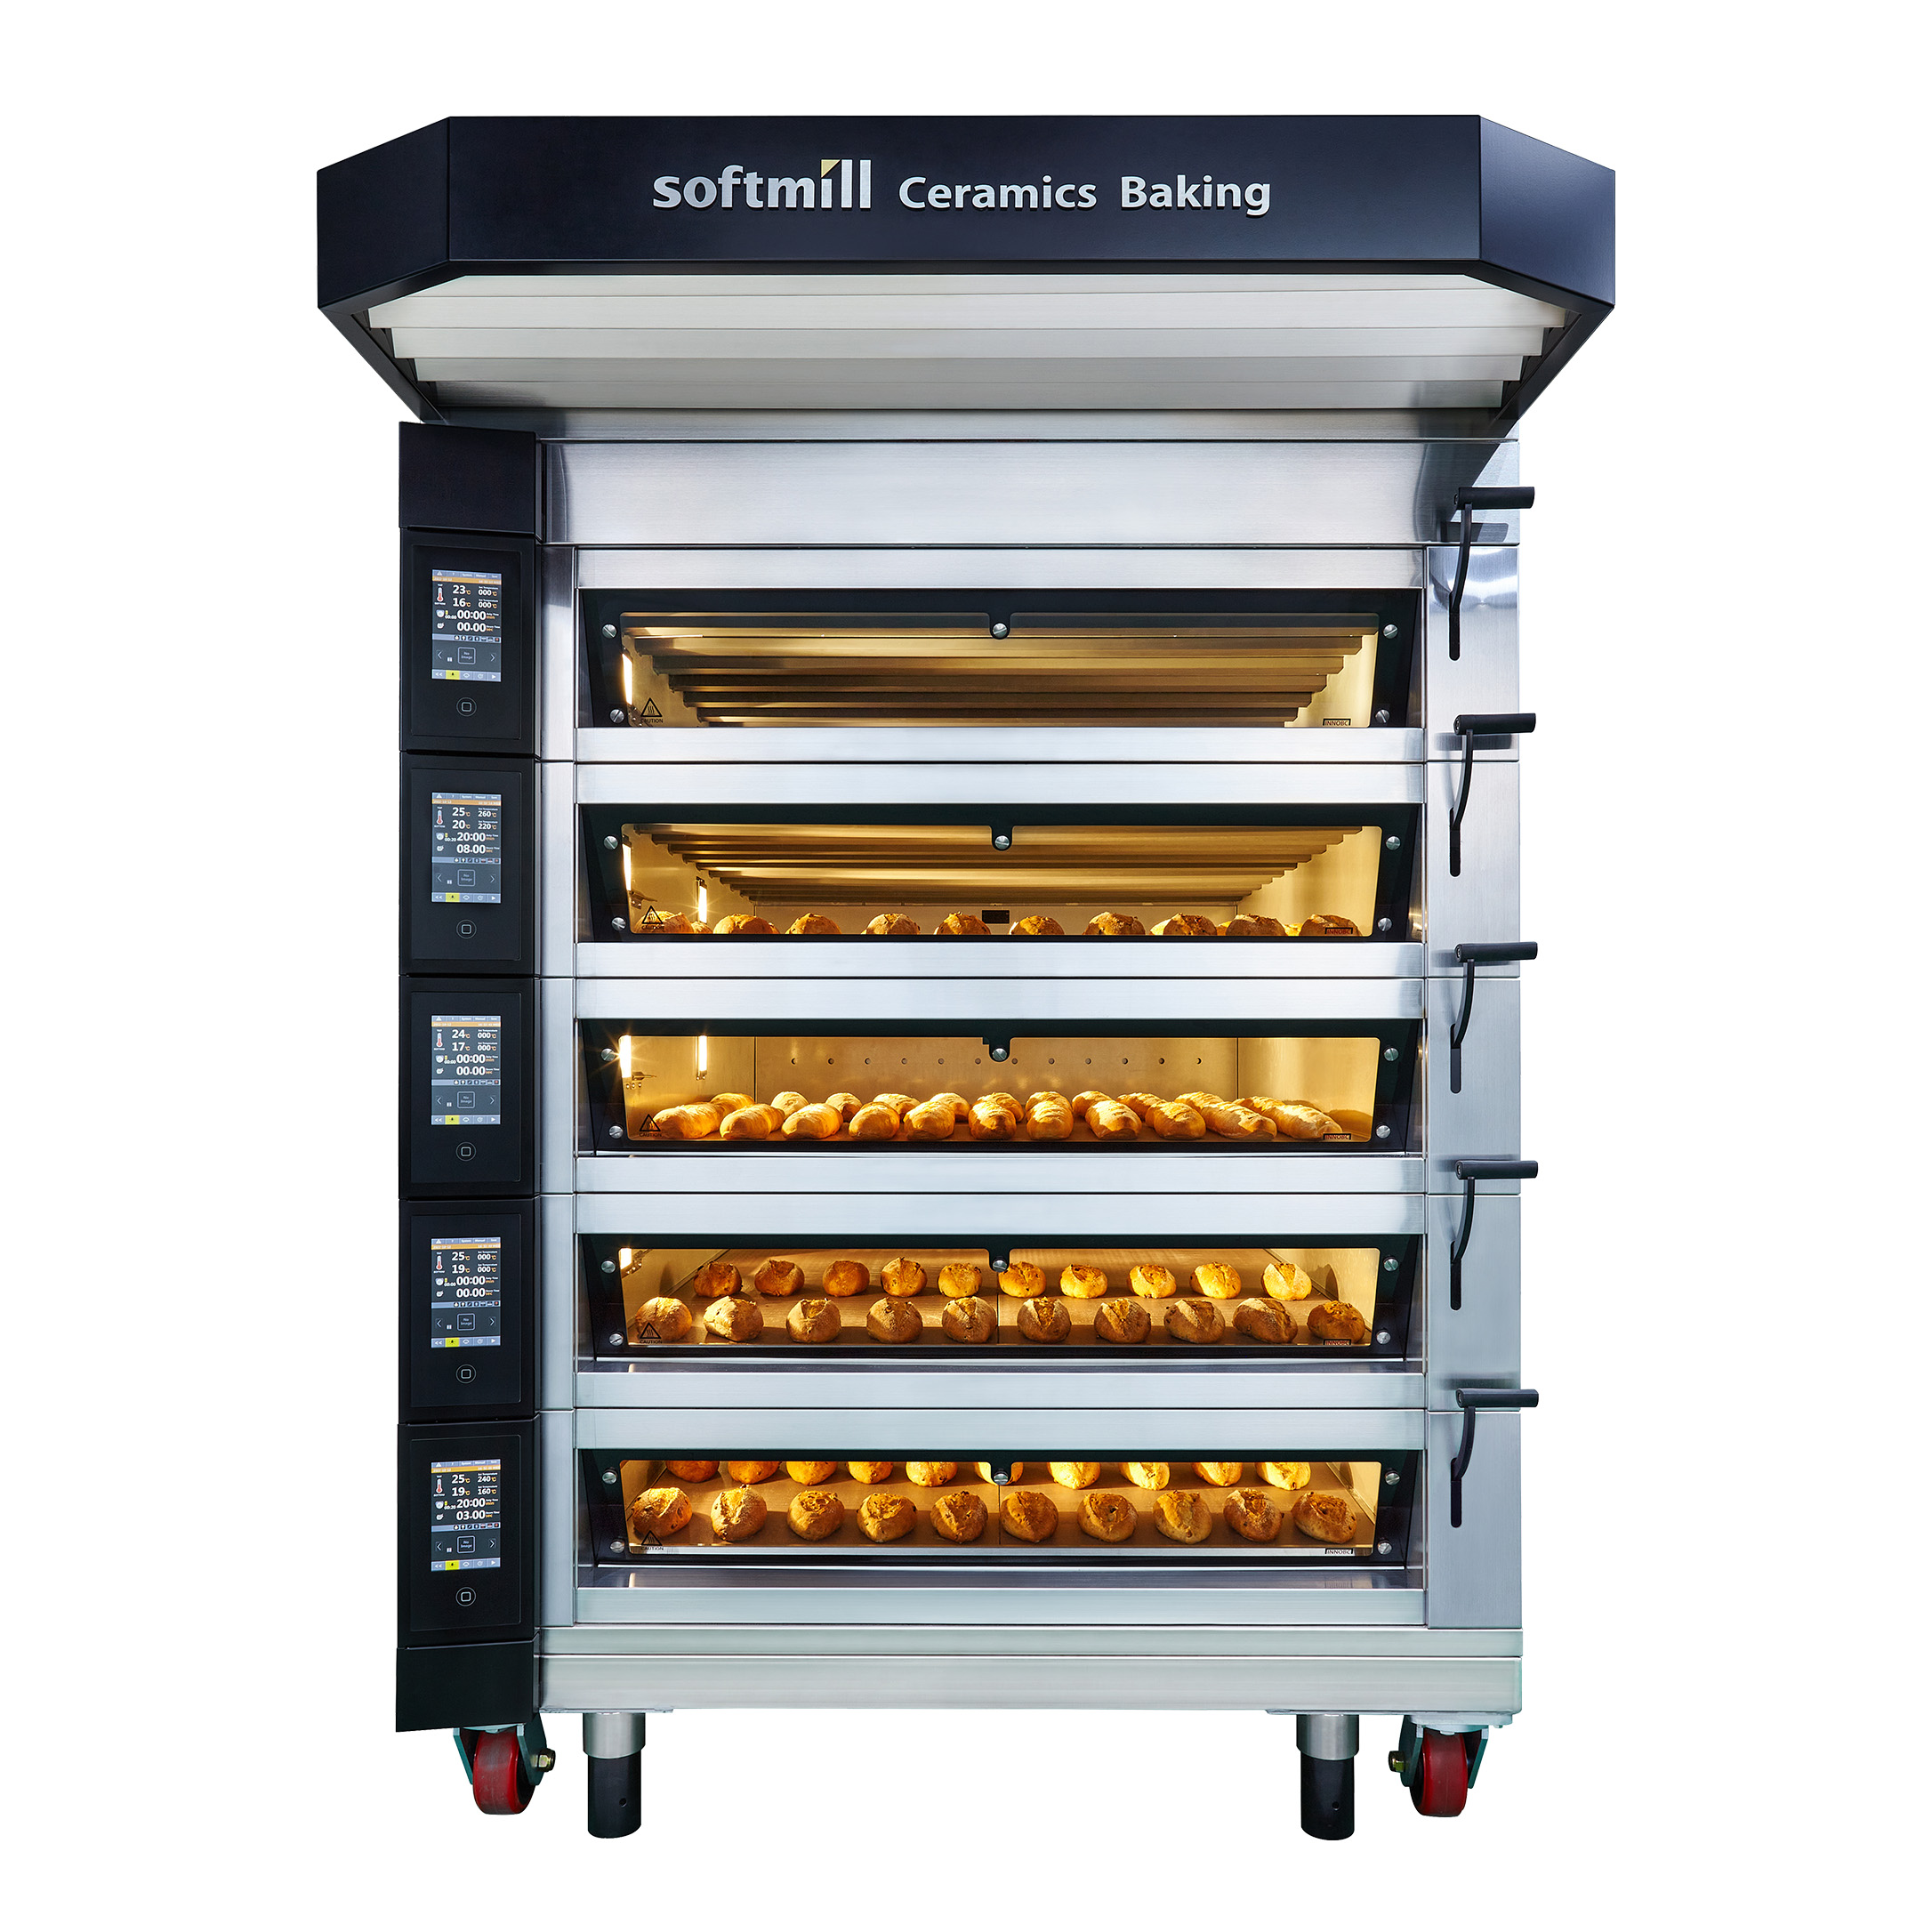 InnoBC Oven 8 trays 5 tiers detail mini size images